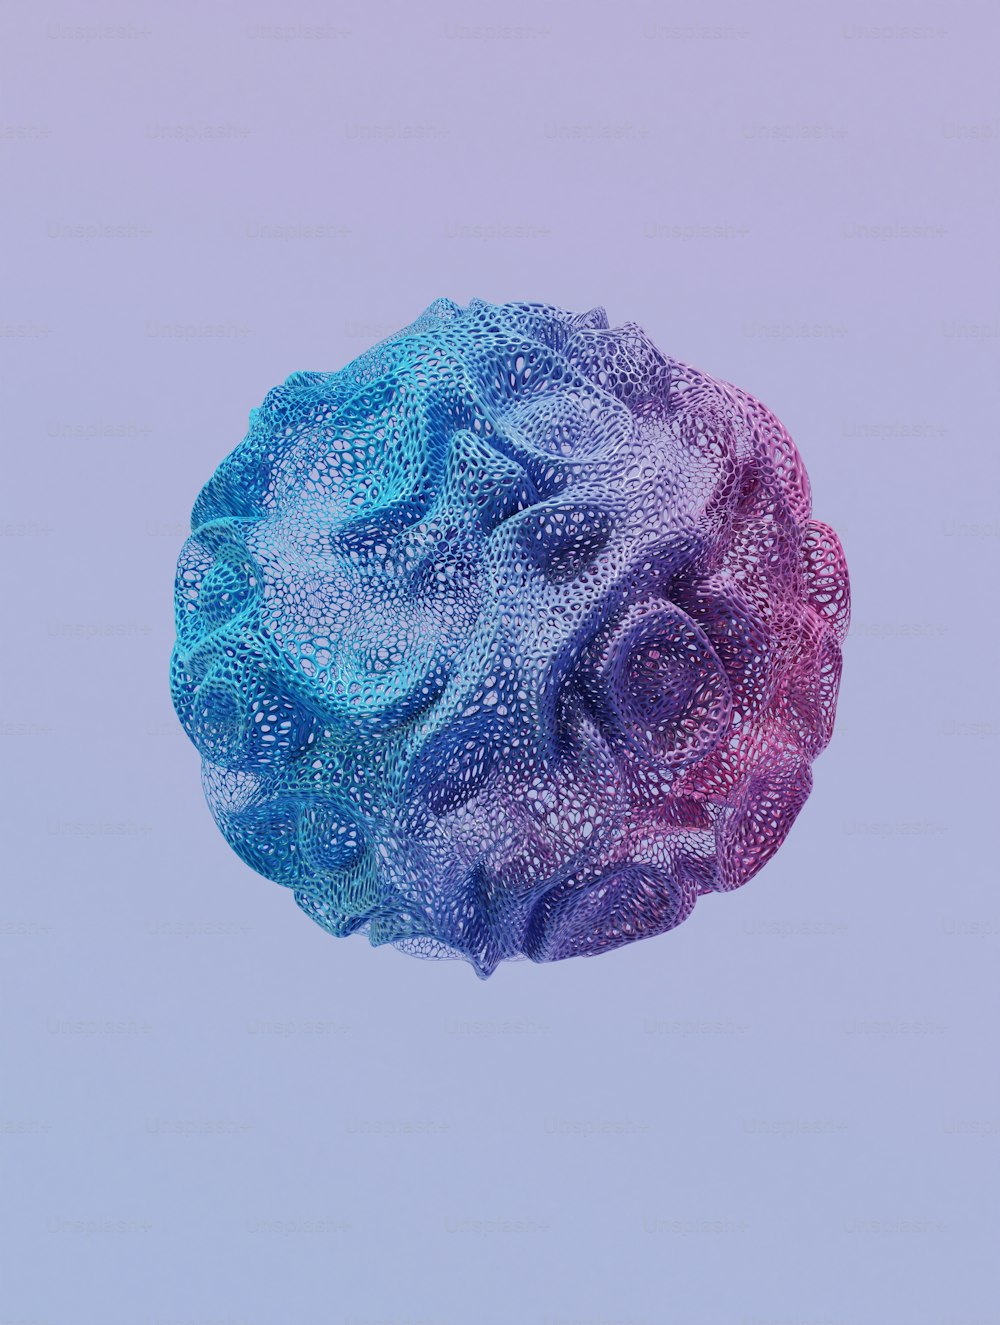 a multicolored ball of soap bubbles floating in the air